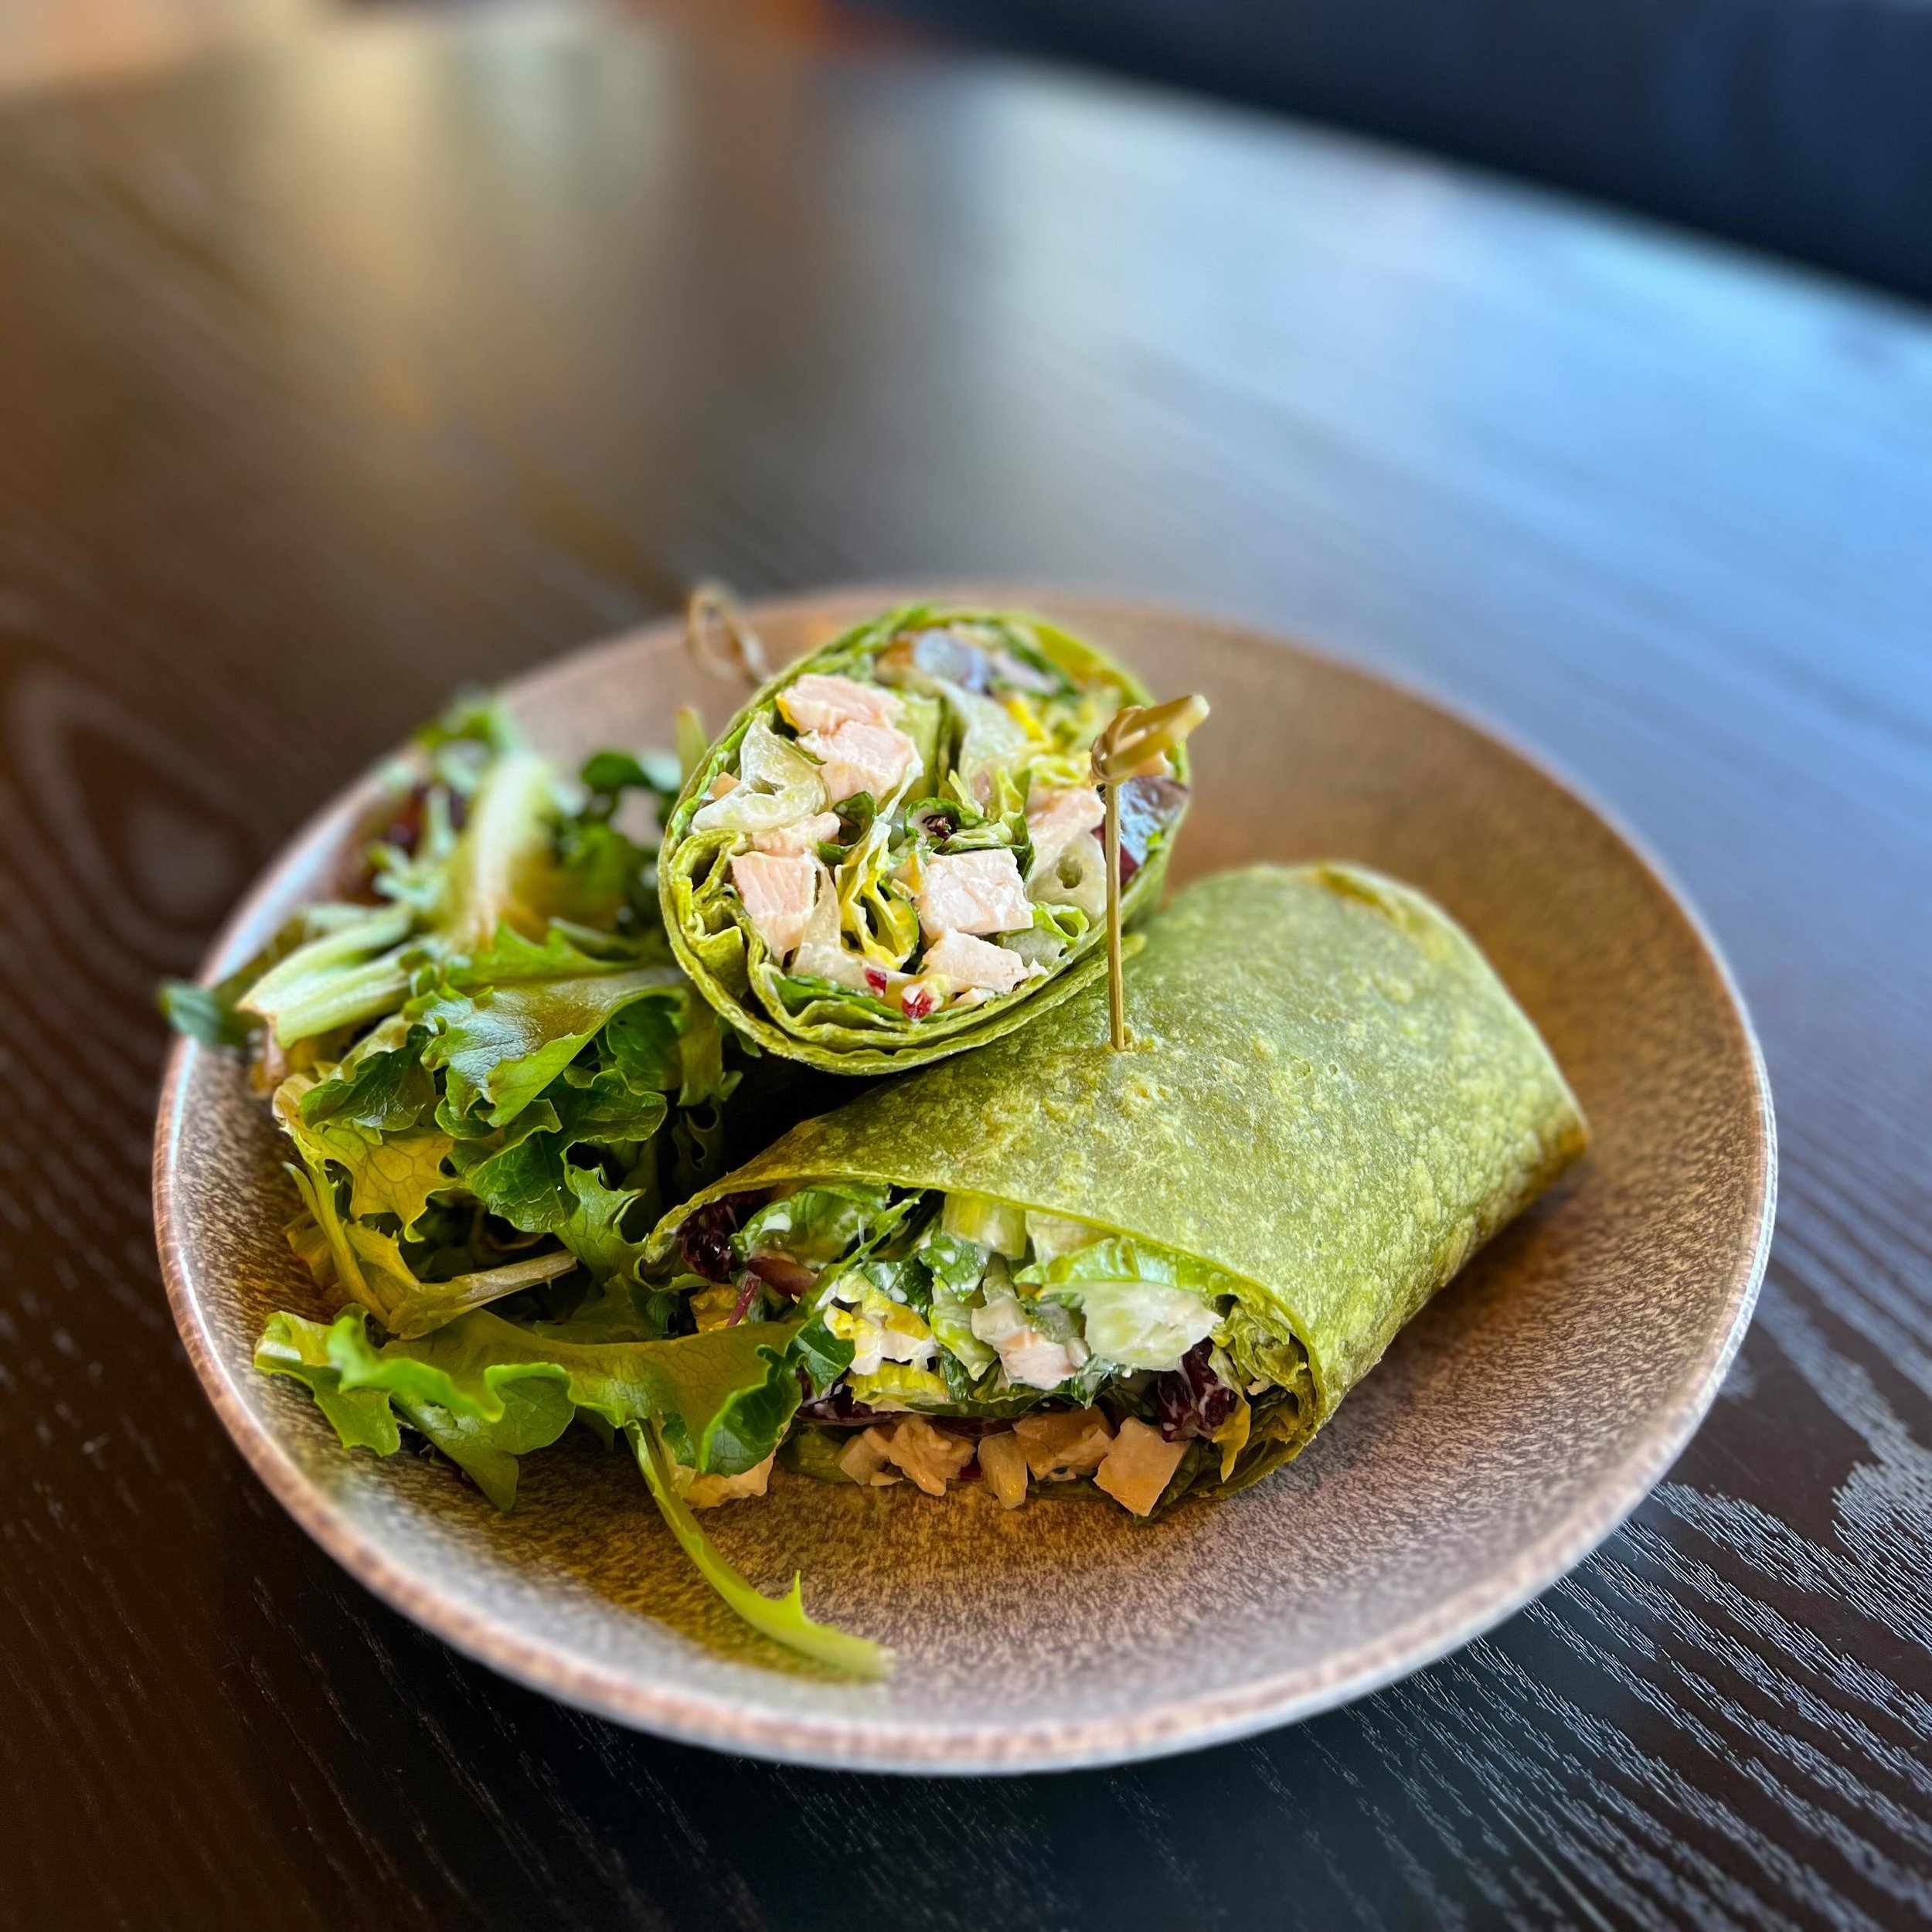 The perfect way to wrap up your day 🥬

Our Tarragon Turkey Salad Wrap is the perfect balance of fresh and savory. Roasted turkey breast, grapes, celery, dried cranberry, vegan tarragon aioli, romaine lettuce, in a spinach tortilla. 

#plantforwardlu